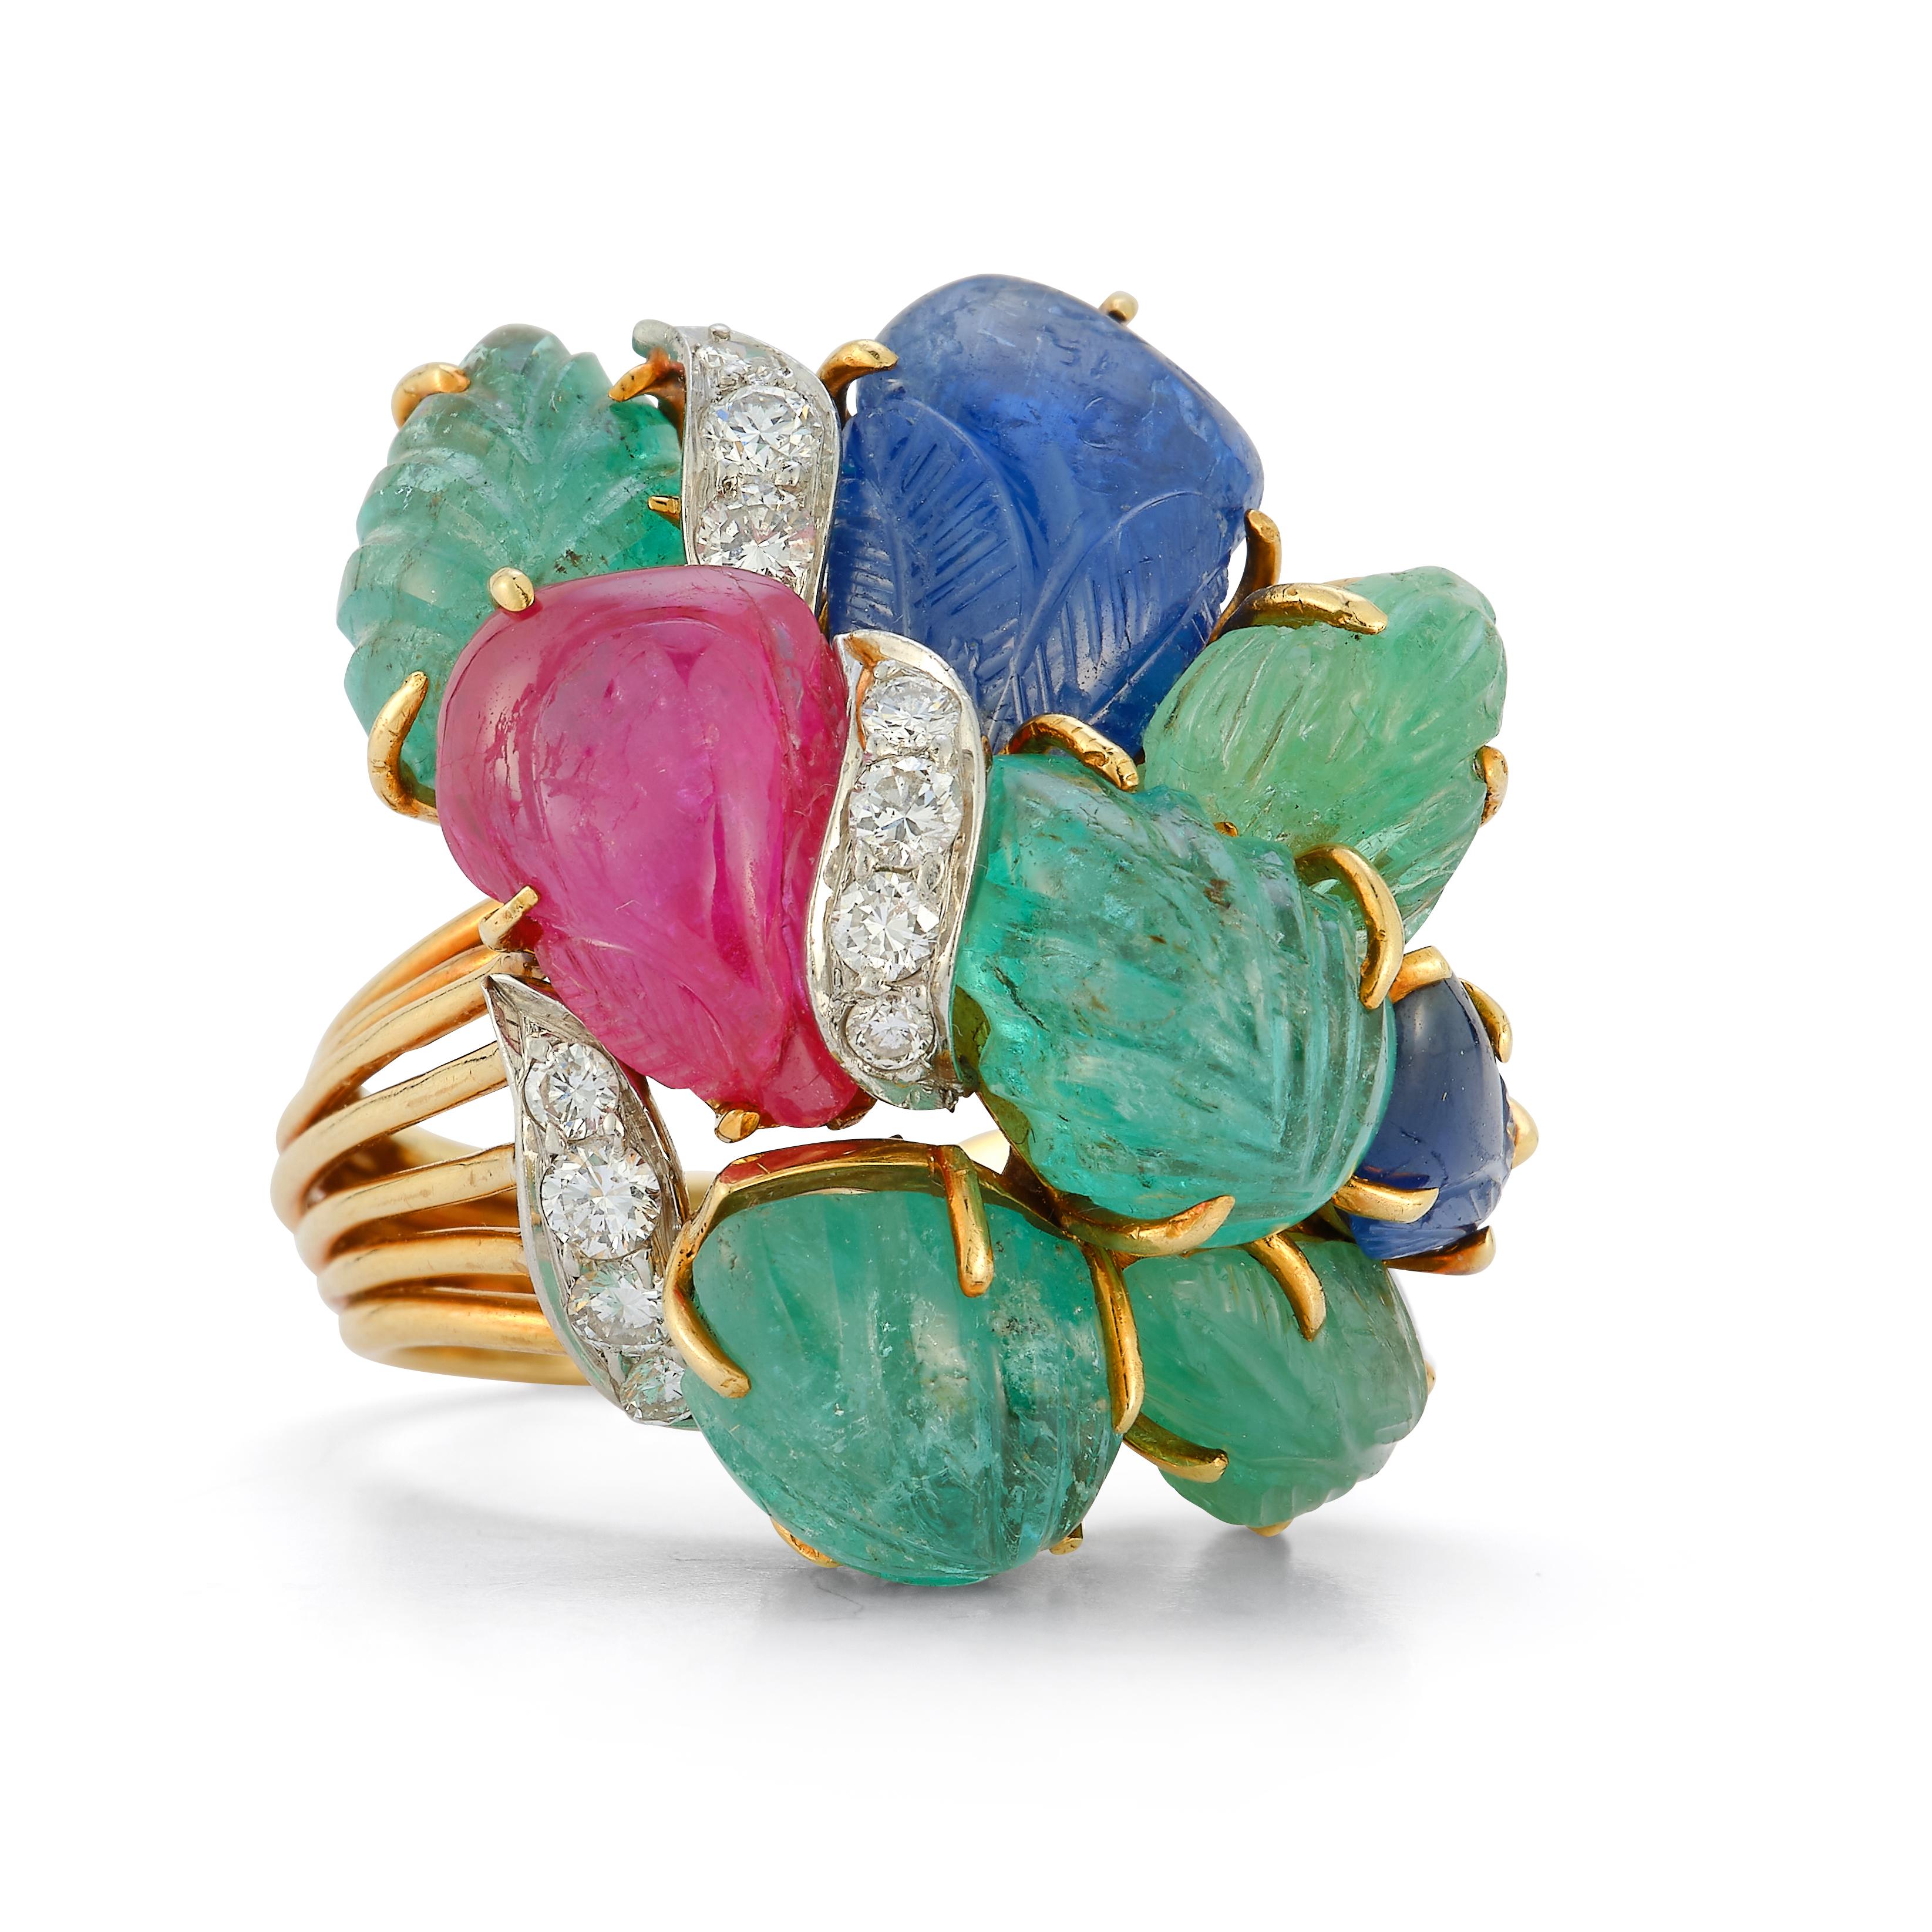 David Webb Tutti Frutti Ring 
 
An 18 karat gold ring set with carved emeralds, sapphires, & ruby, accented with 12 round cut diamonds

French import assay marks for platinum and 18 carat gold

Signed David Webb

Ring Size: 5.5
Re-sizable Free Of